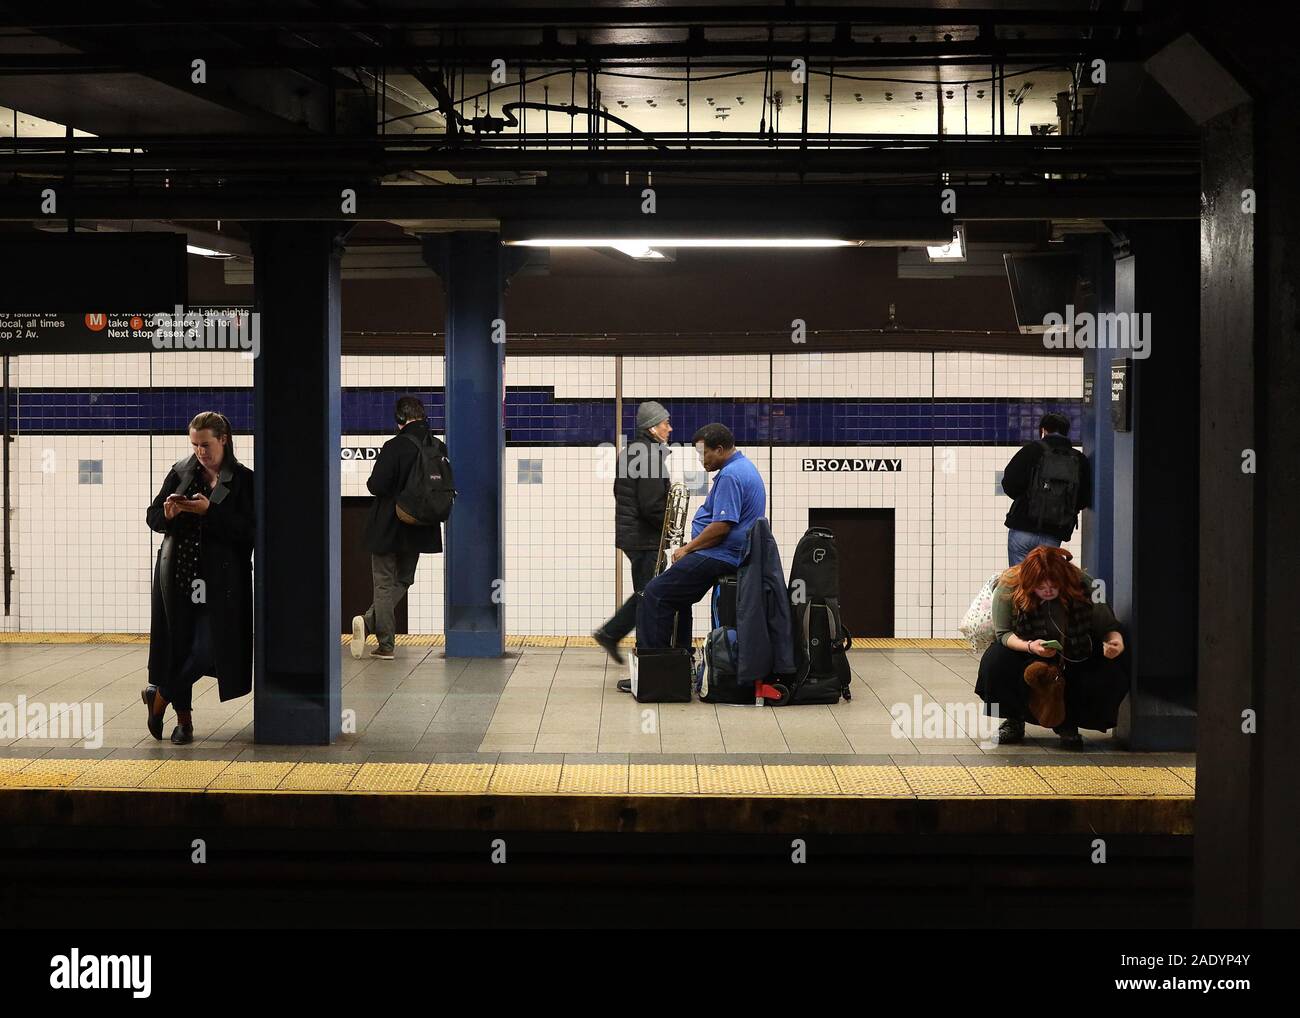 New York City, NY - Novermber 26, 2019: Unidentified trumpetist sitting on his luggage while other unidentified people look at their phones in Manhatt Stock Photo